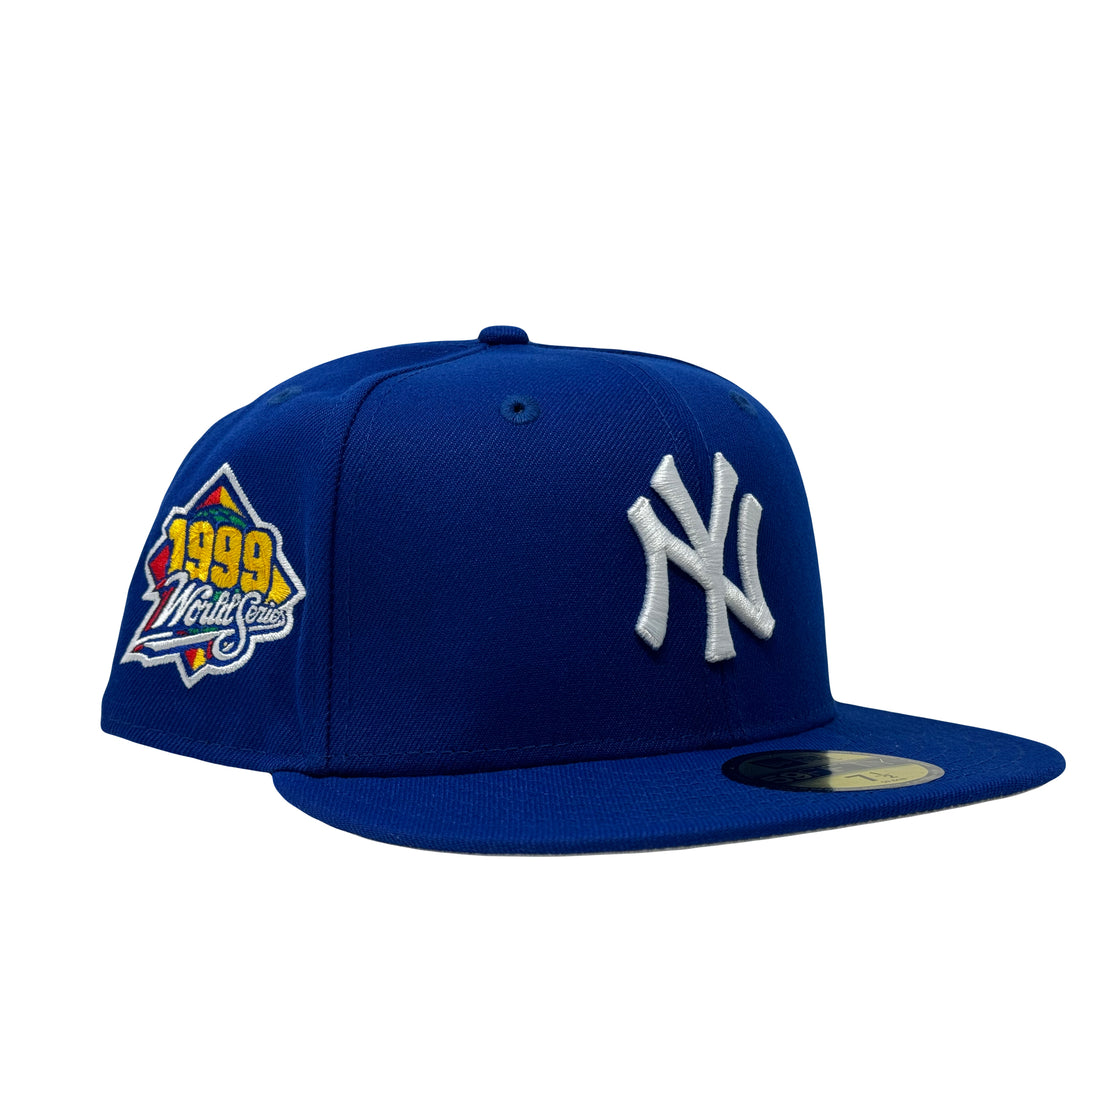 New York Yankees 1999 World Series Royal Blue 5950 New Era Fitted Hat